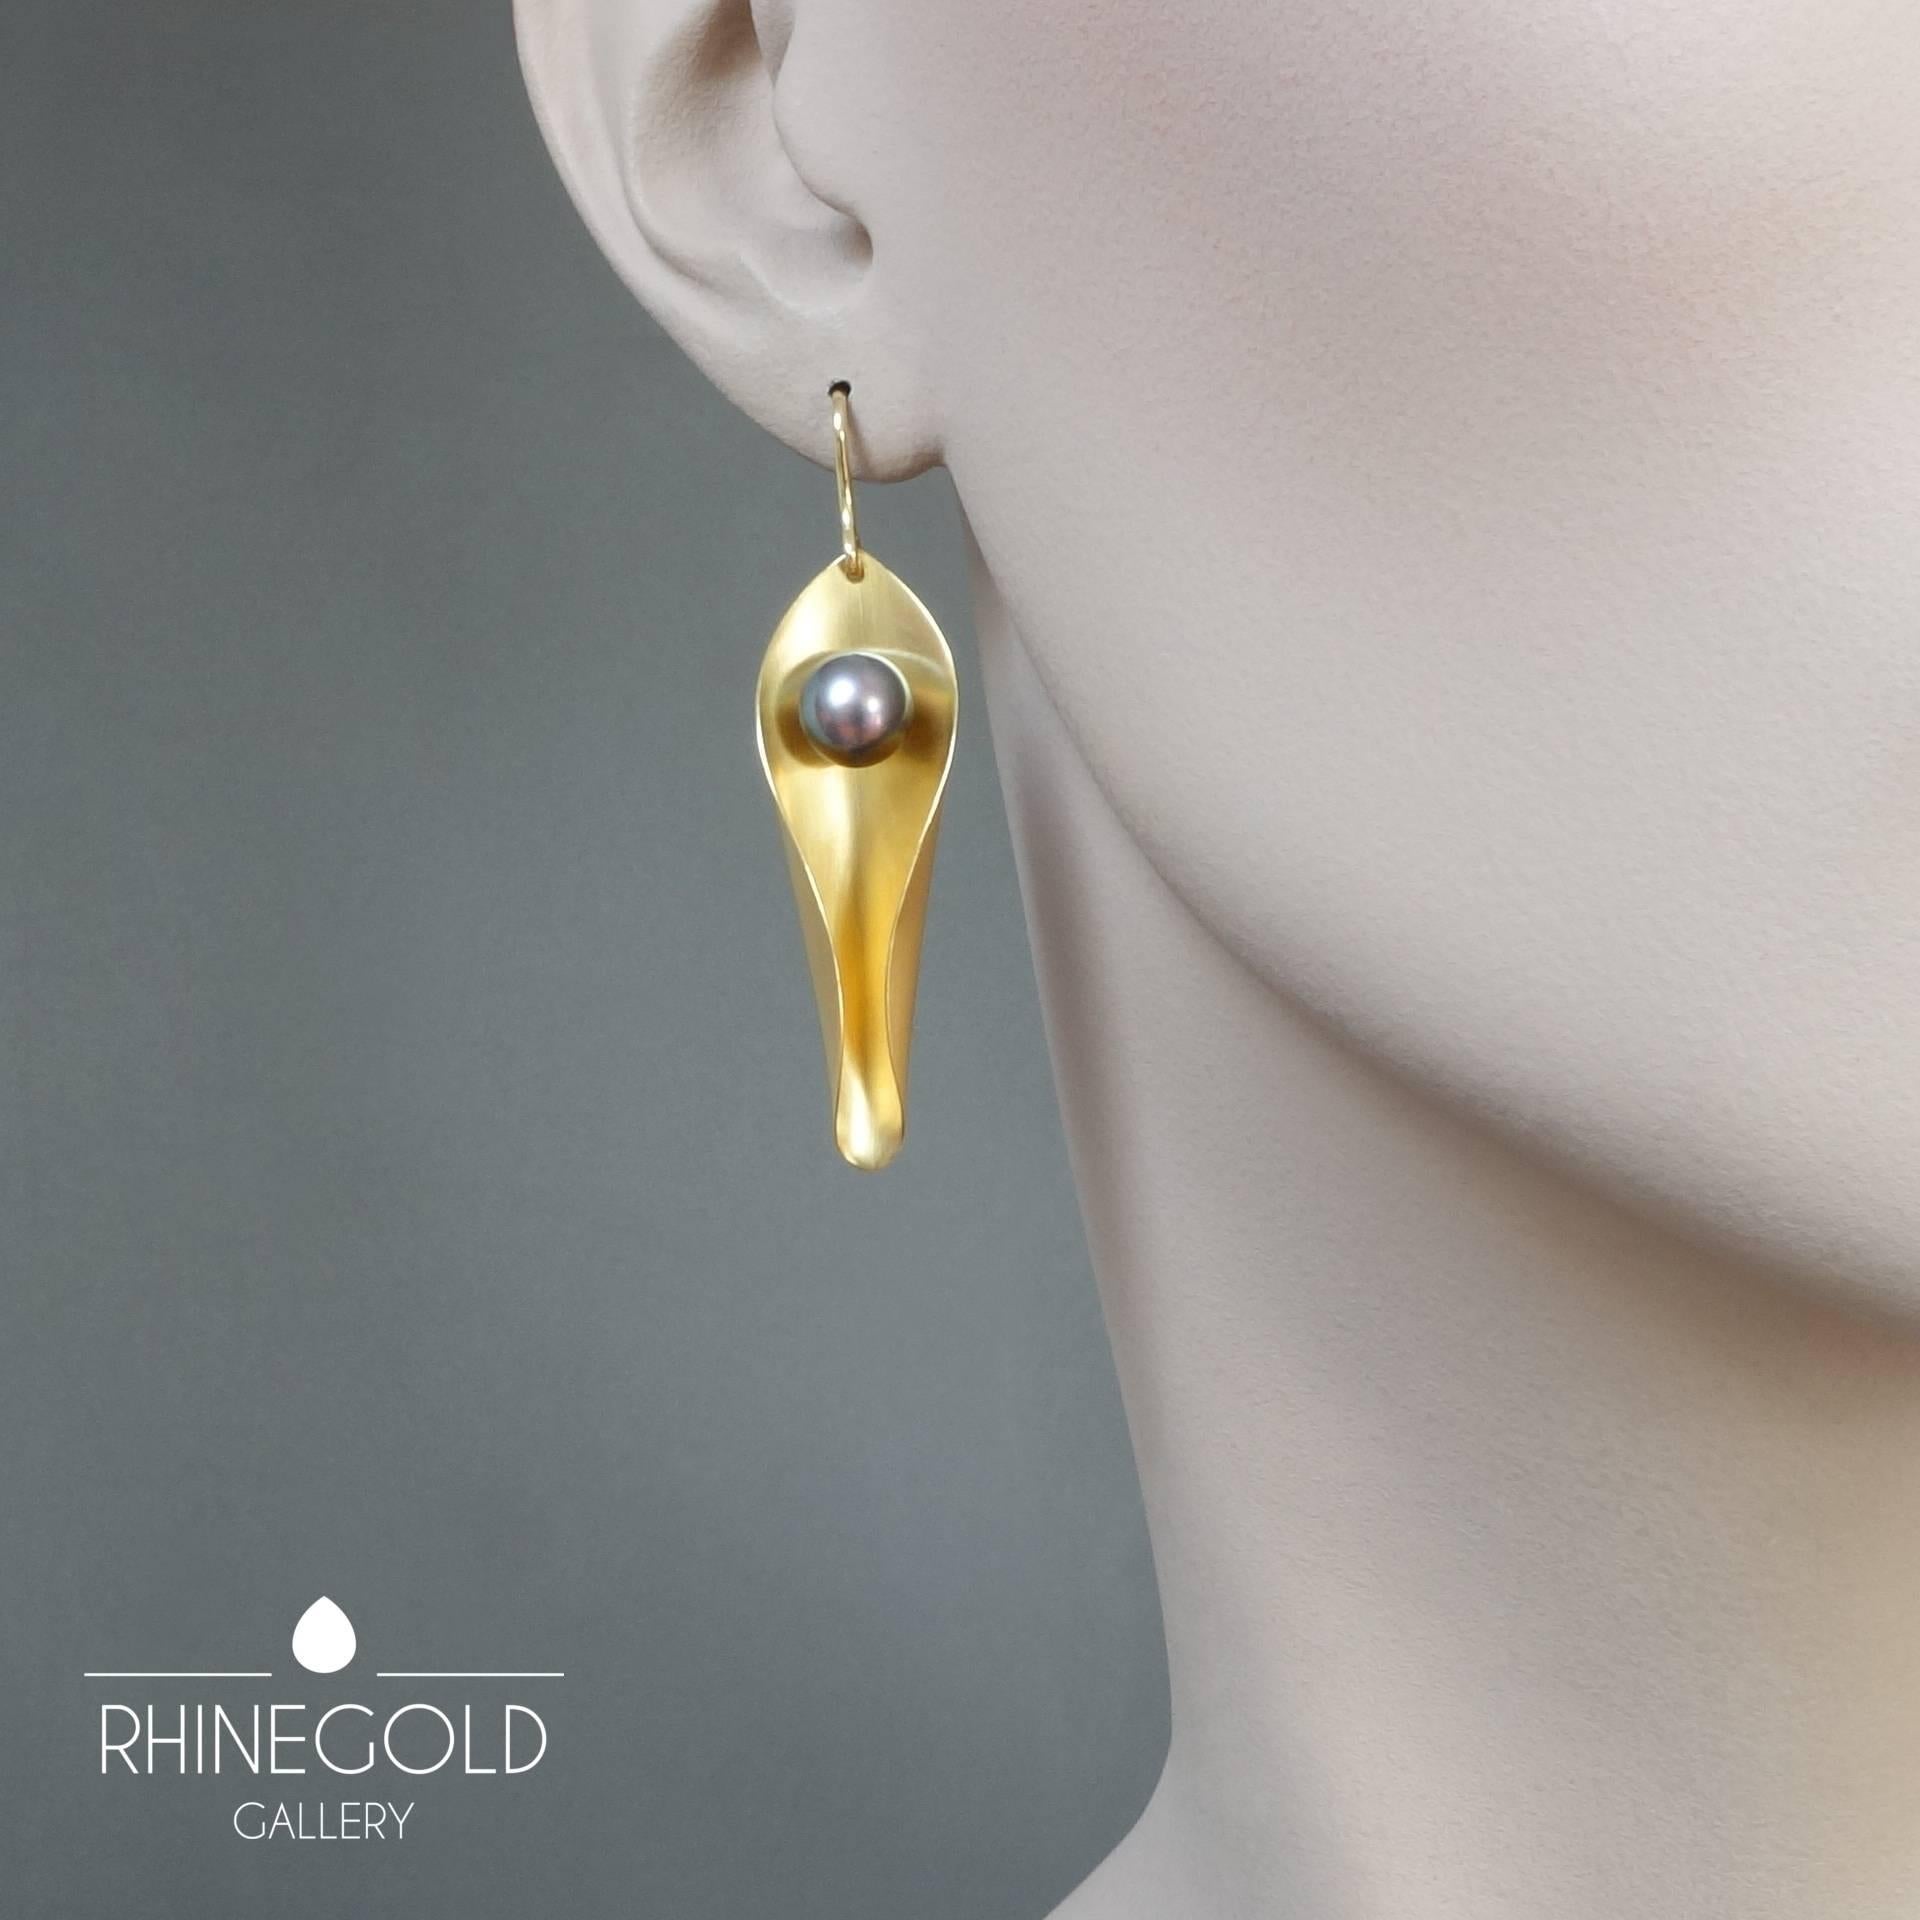 An Elegant Pair of Unique Modern Day-to-Night Pearl Gold Earrings
18k yellow gold, 2 grey cultured pearls
Length (incl.hook) approx. 2 3/16” (5.5 cm), width max. 9/16” (1.45 cm); diameter of pearls approx. 5/16” (8 mm)
Weight approx. 9.5